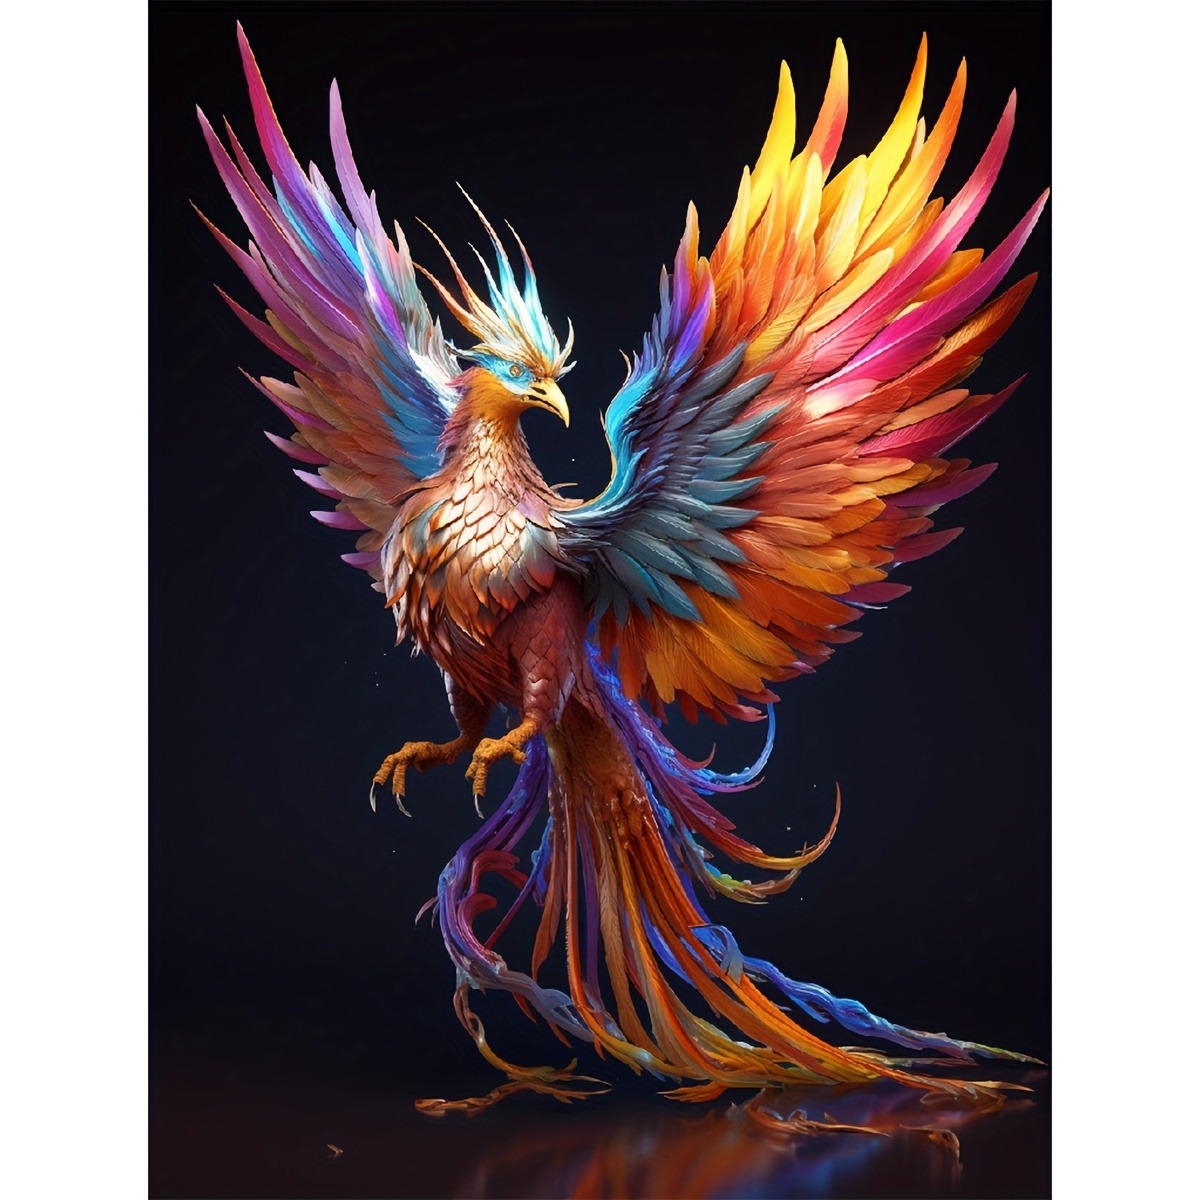  DIY 5D Diamond Painting Kits for Adults,Purple and Blue Phoenix  Bird,for Relaxation and Home Wall Decor 11.8X15.7 inch